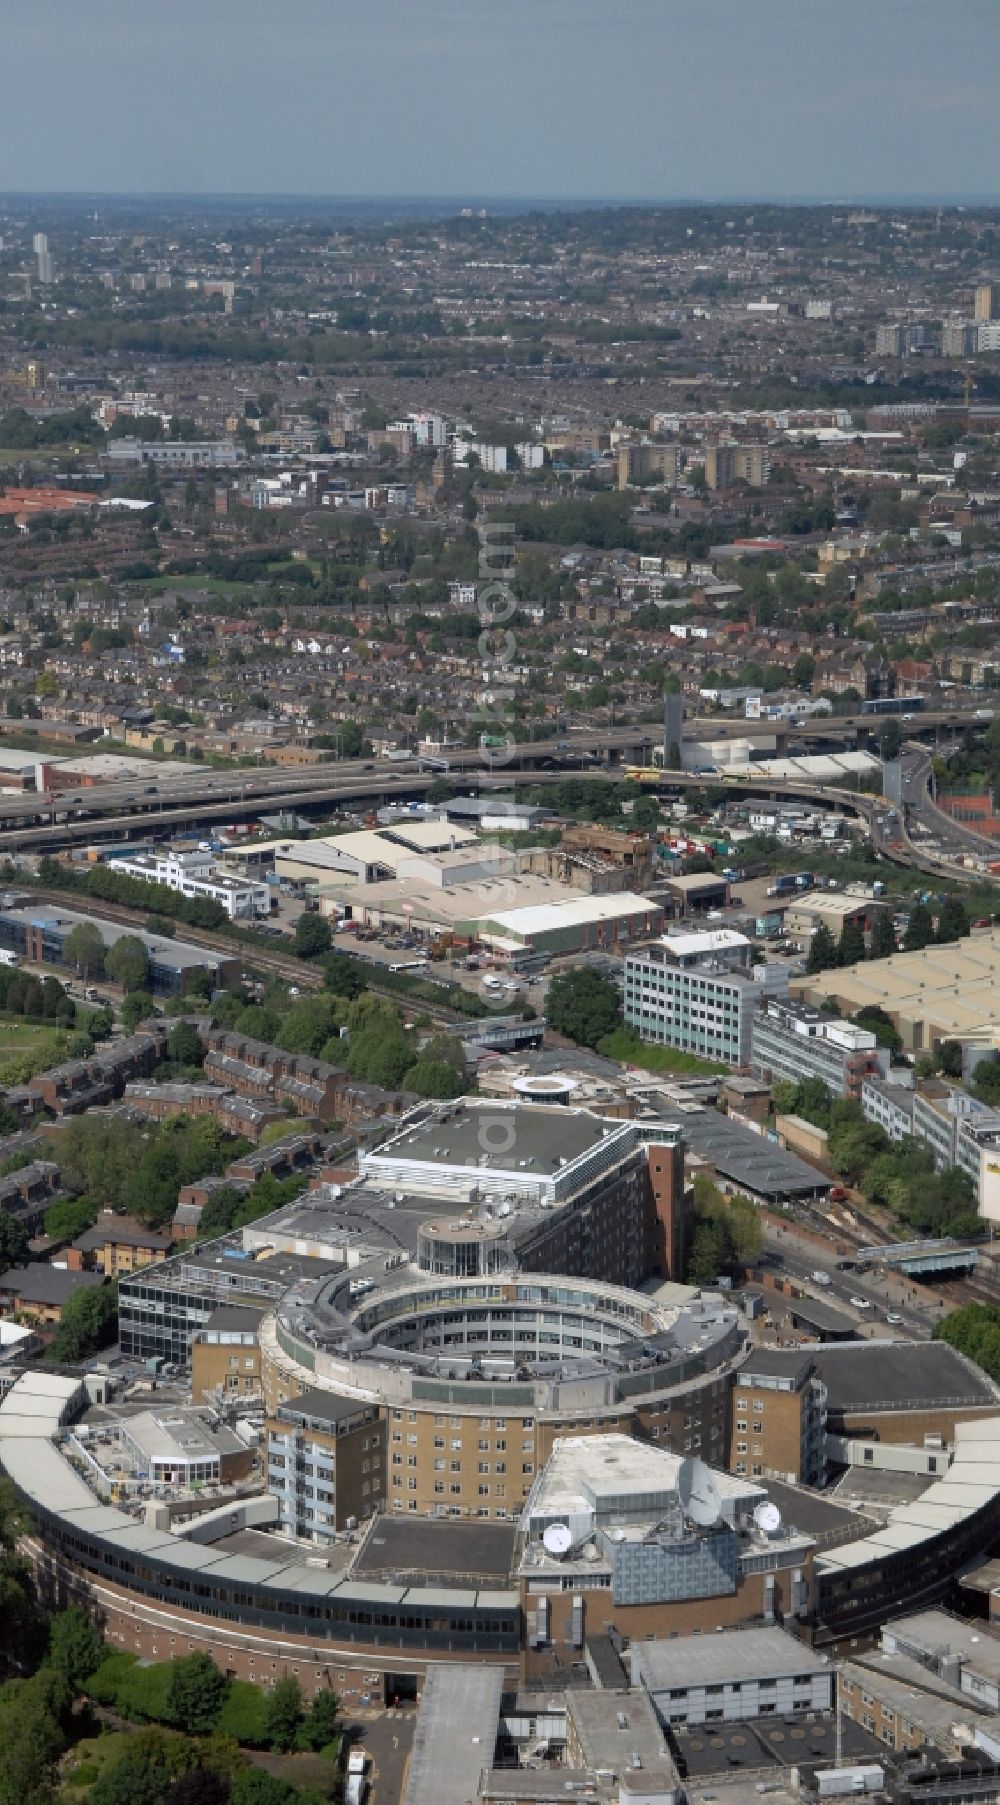 Aerial image London - View of the BBC Televison Centre at White City in West London, the headquarters of the BBC. The building was opened in 1960 and is one of the world's largest buildings, which were designed exclusively for television